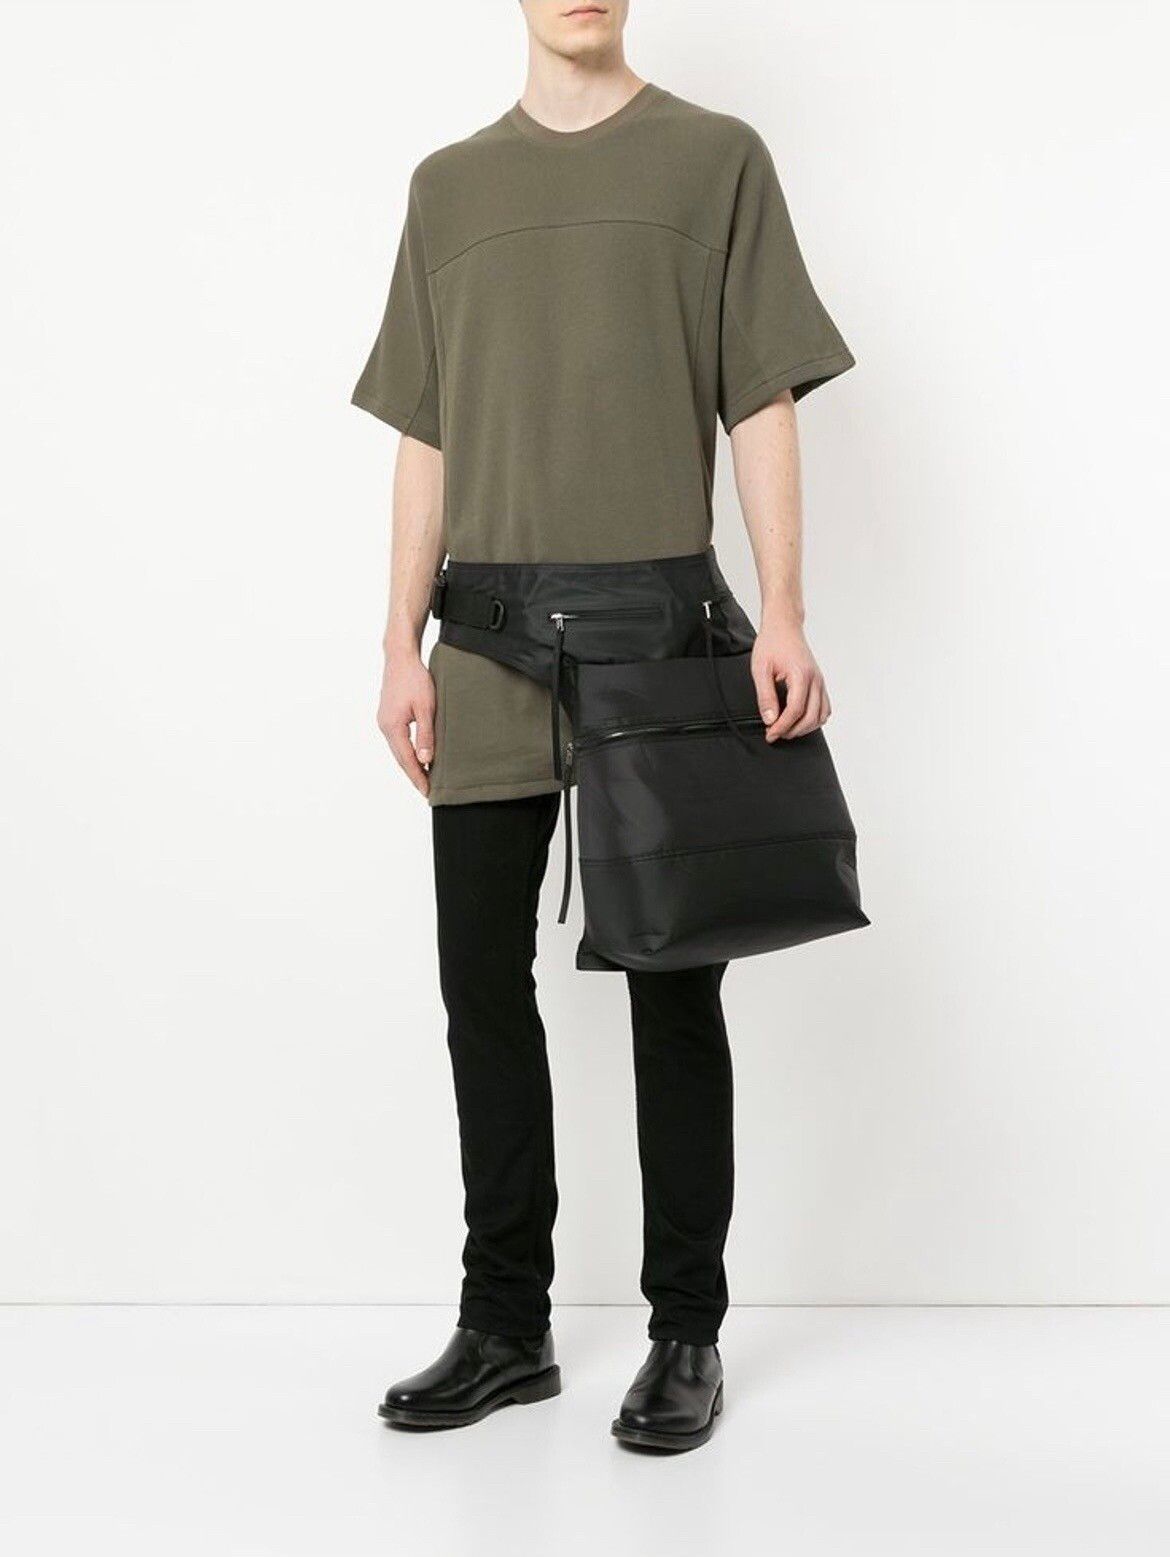 Rick Owens Rick Owens Gold Cargo Chap waste bag ss19 Size ONE SIZE - 2 Preview